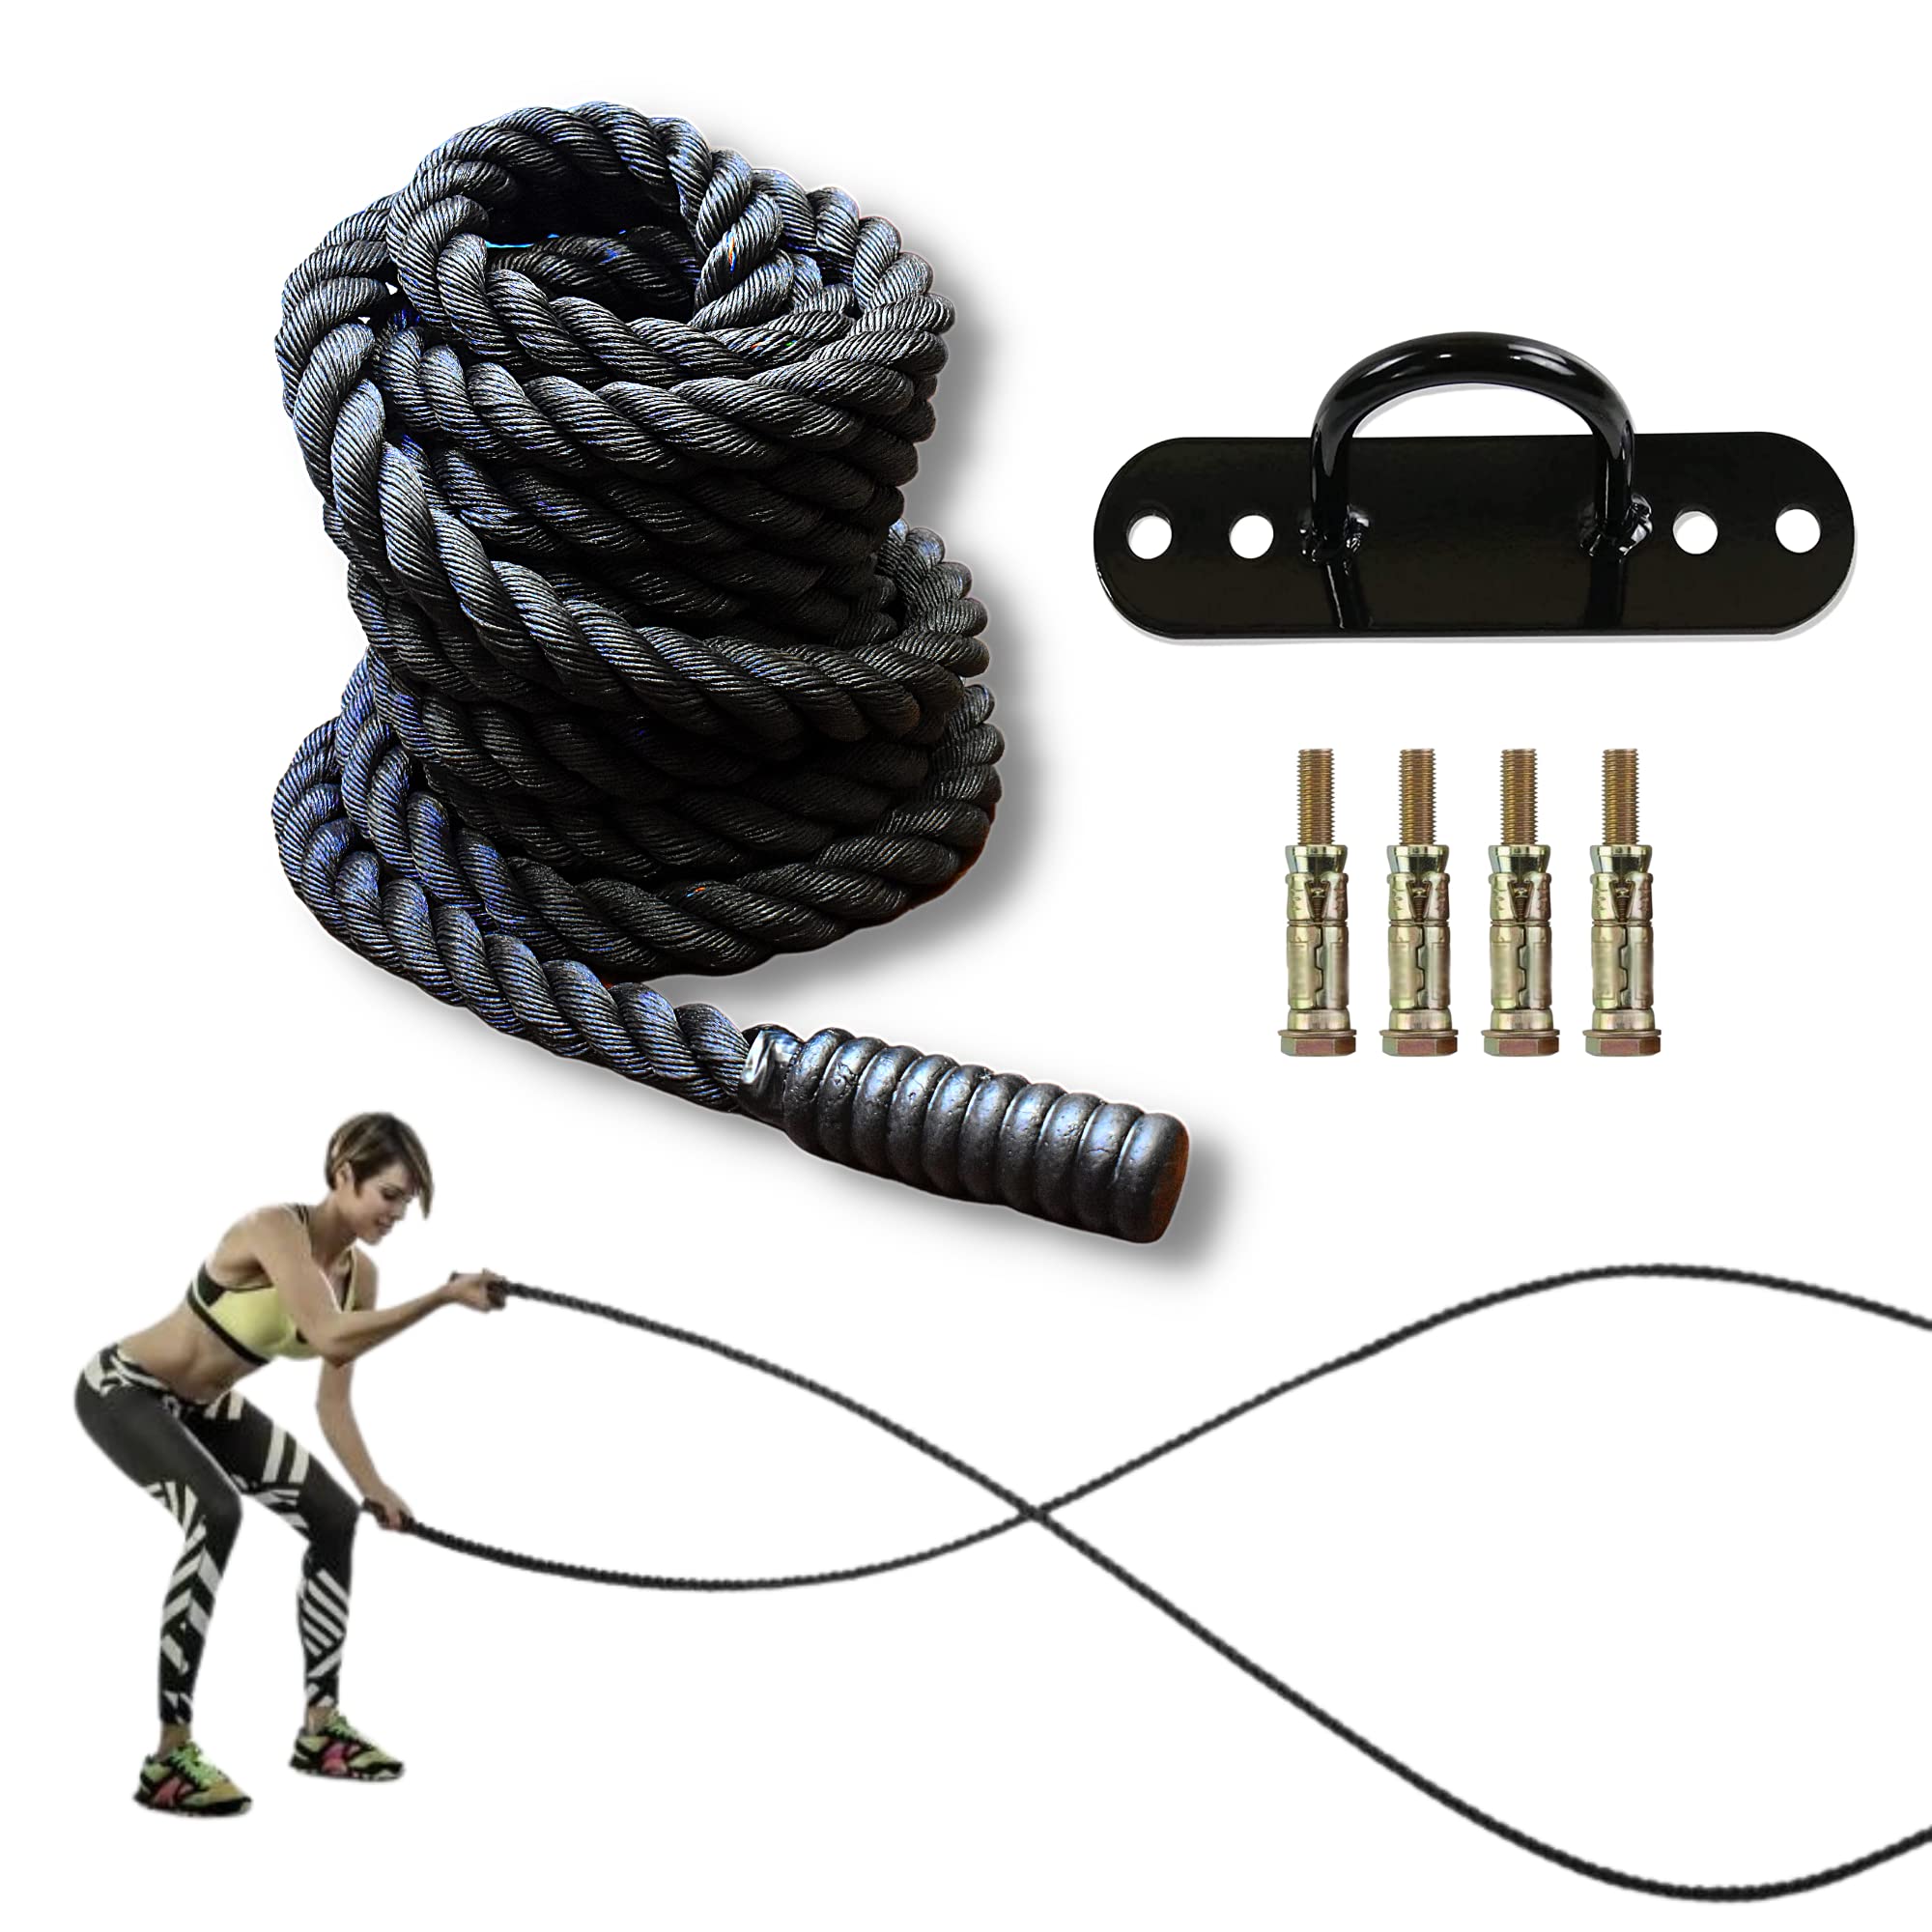 Hashtag Fitness Battle Rope for Gym Heavy Battle Rope for Strength Training  Home Fitness Exercise Rope,D Anchor Strap Included - Hashtag Fitness :  Online gym equipments for home